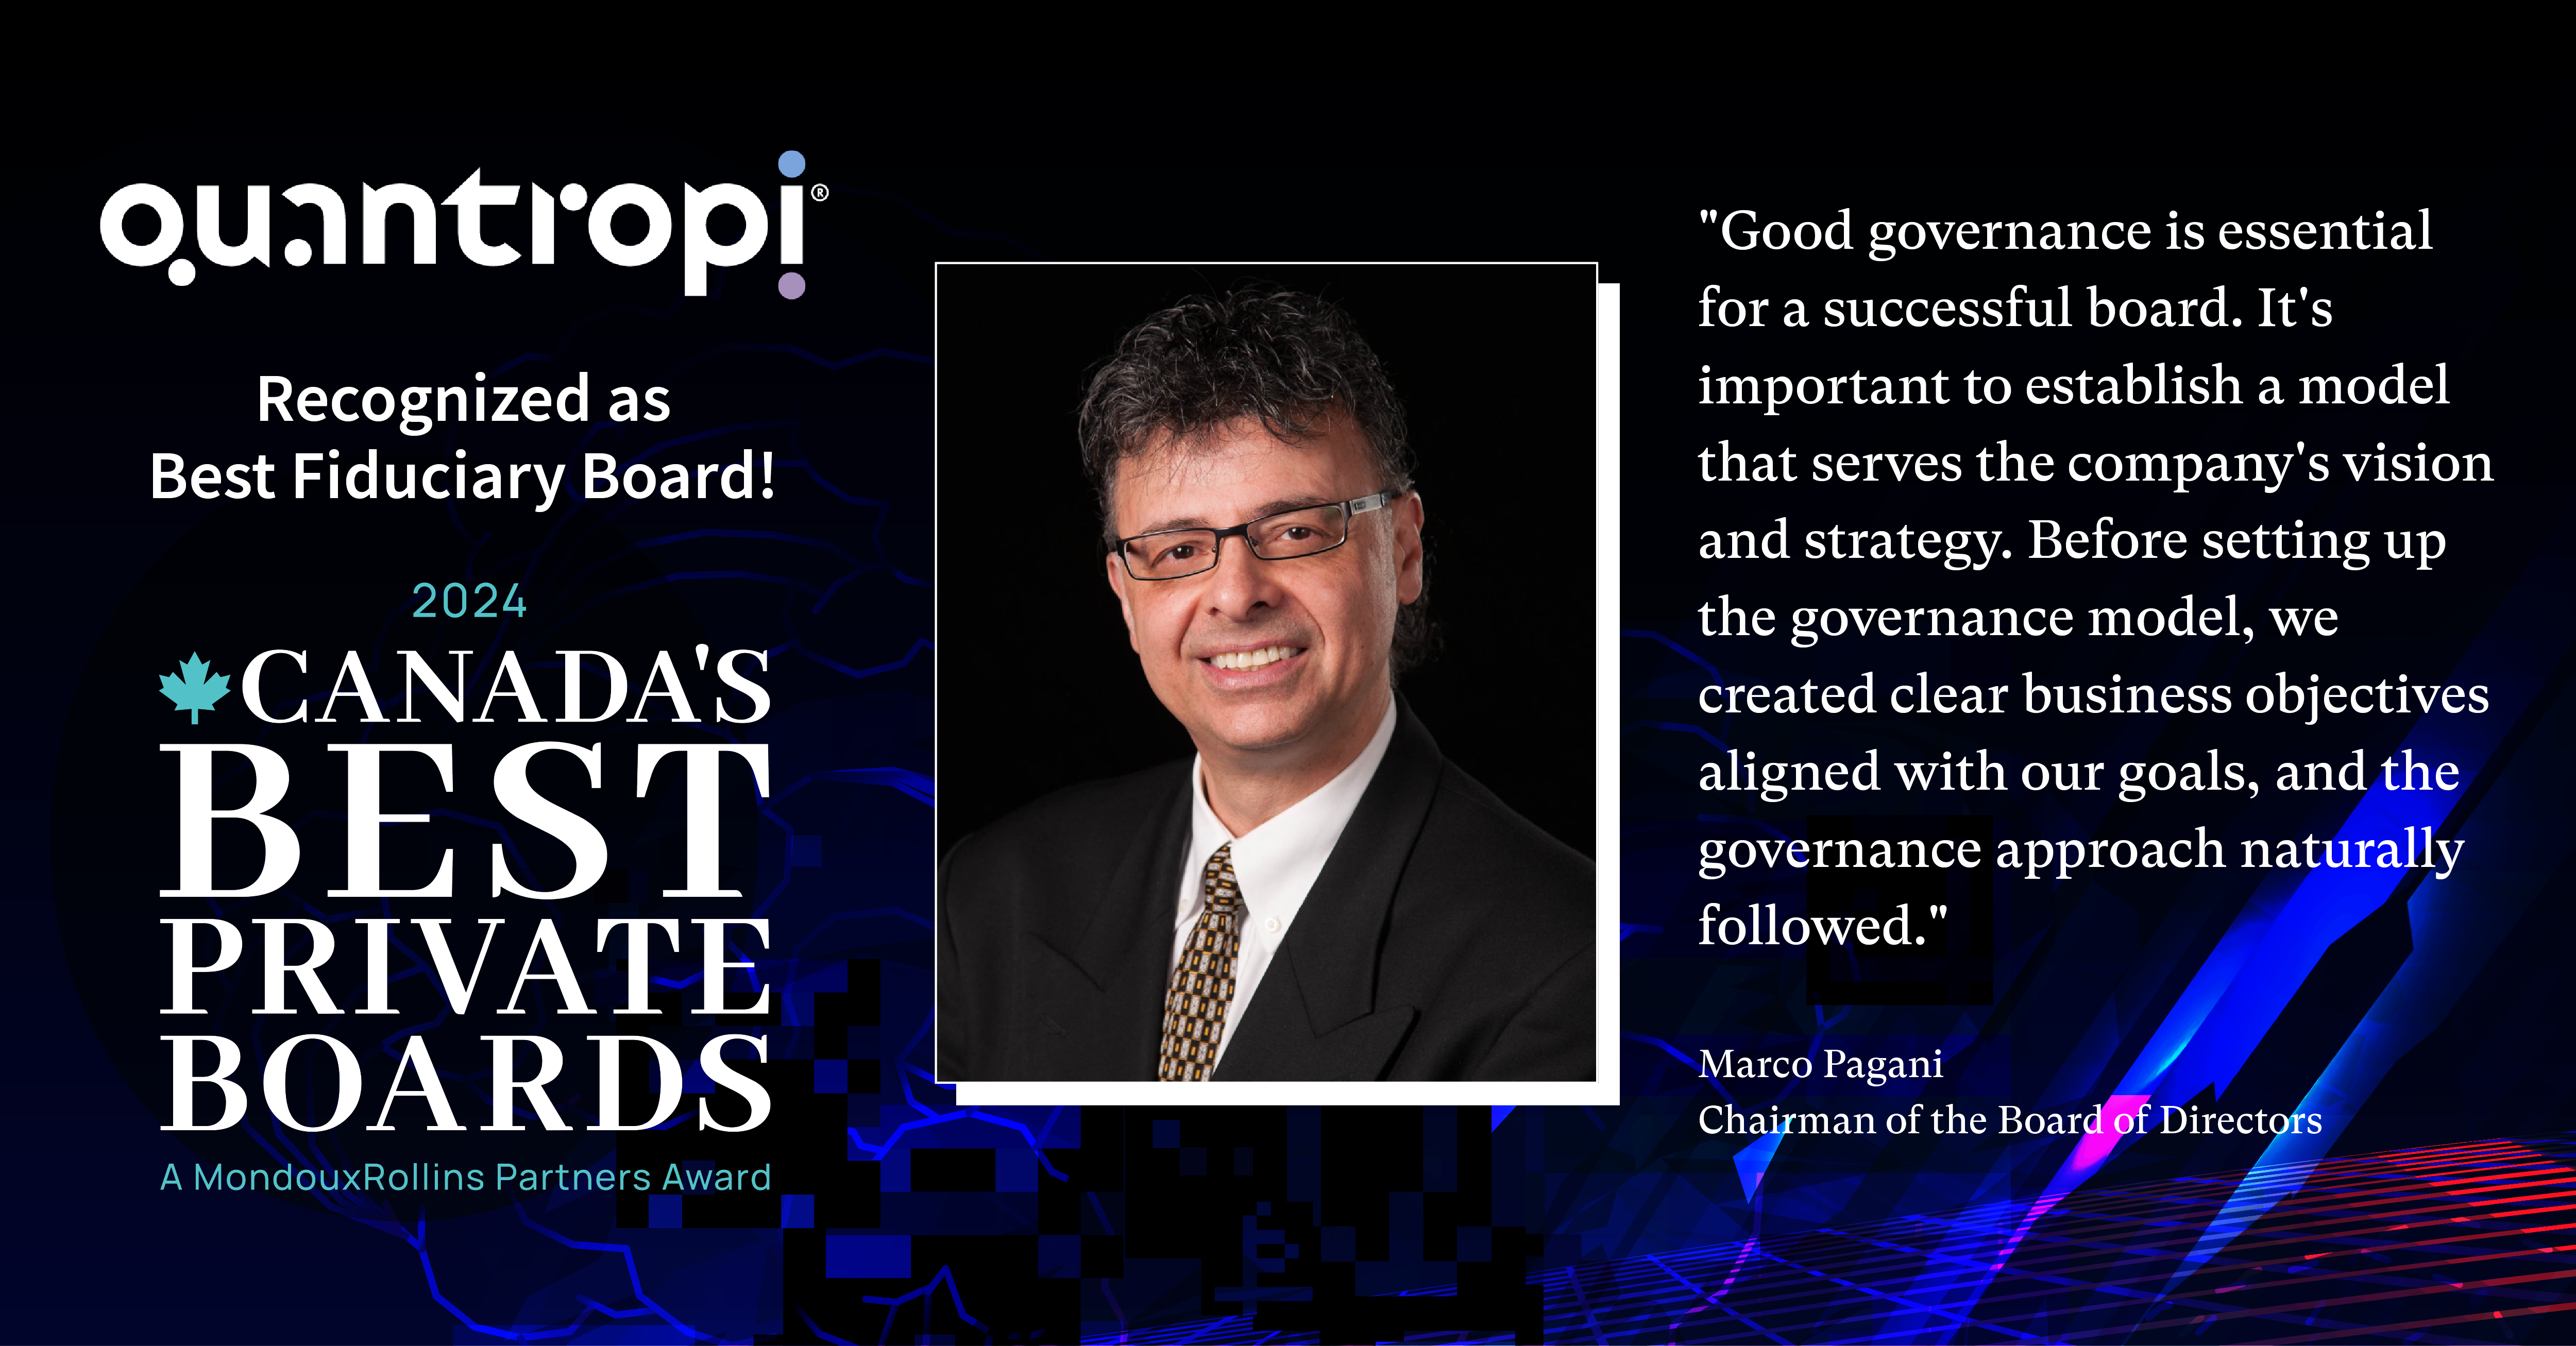 Marco Pagani on Quantropi being awarded Canada's Best Private Board in the Best Fiduciary Board category.